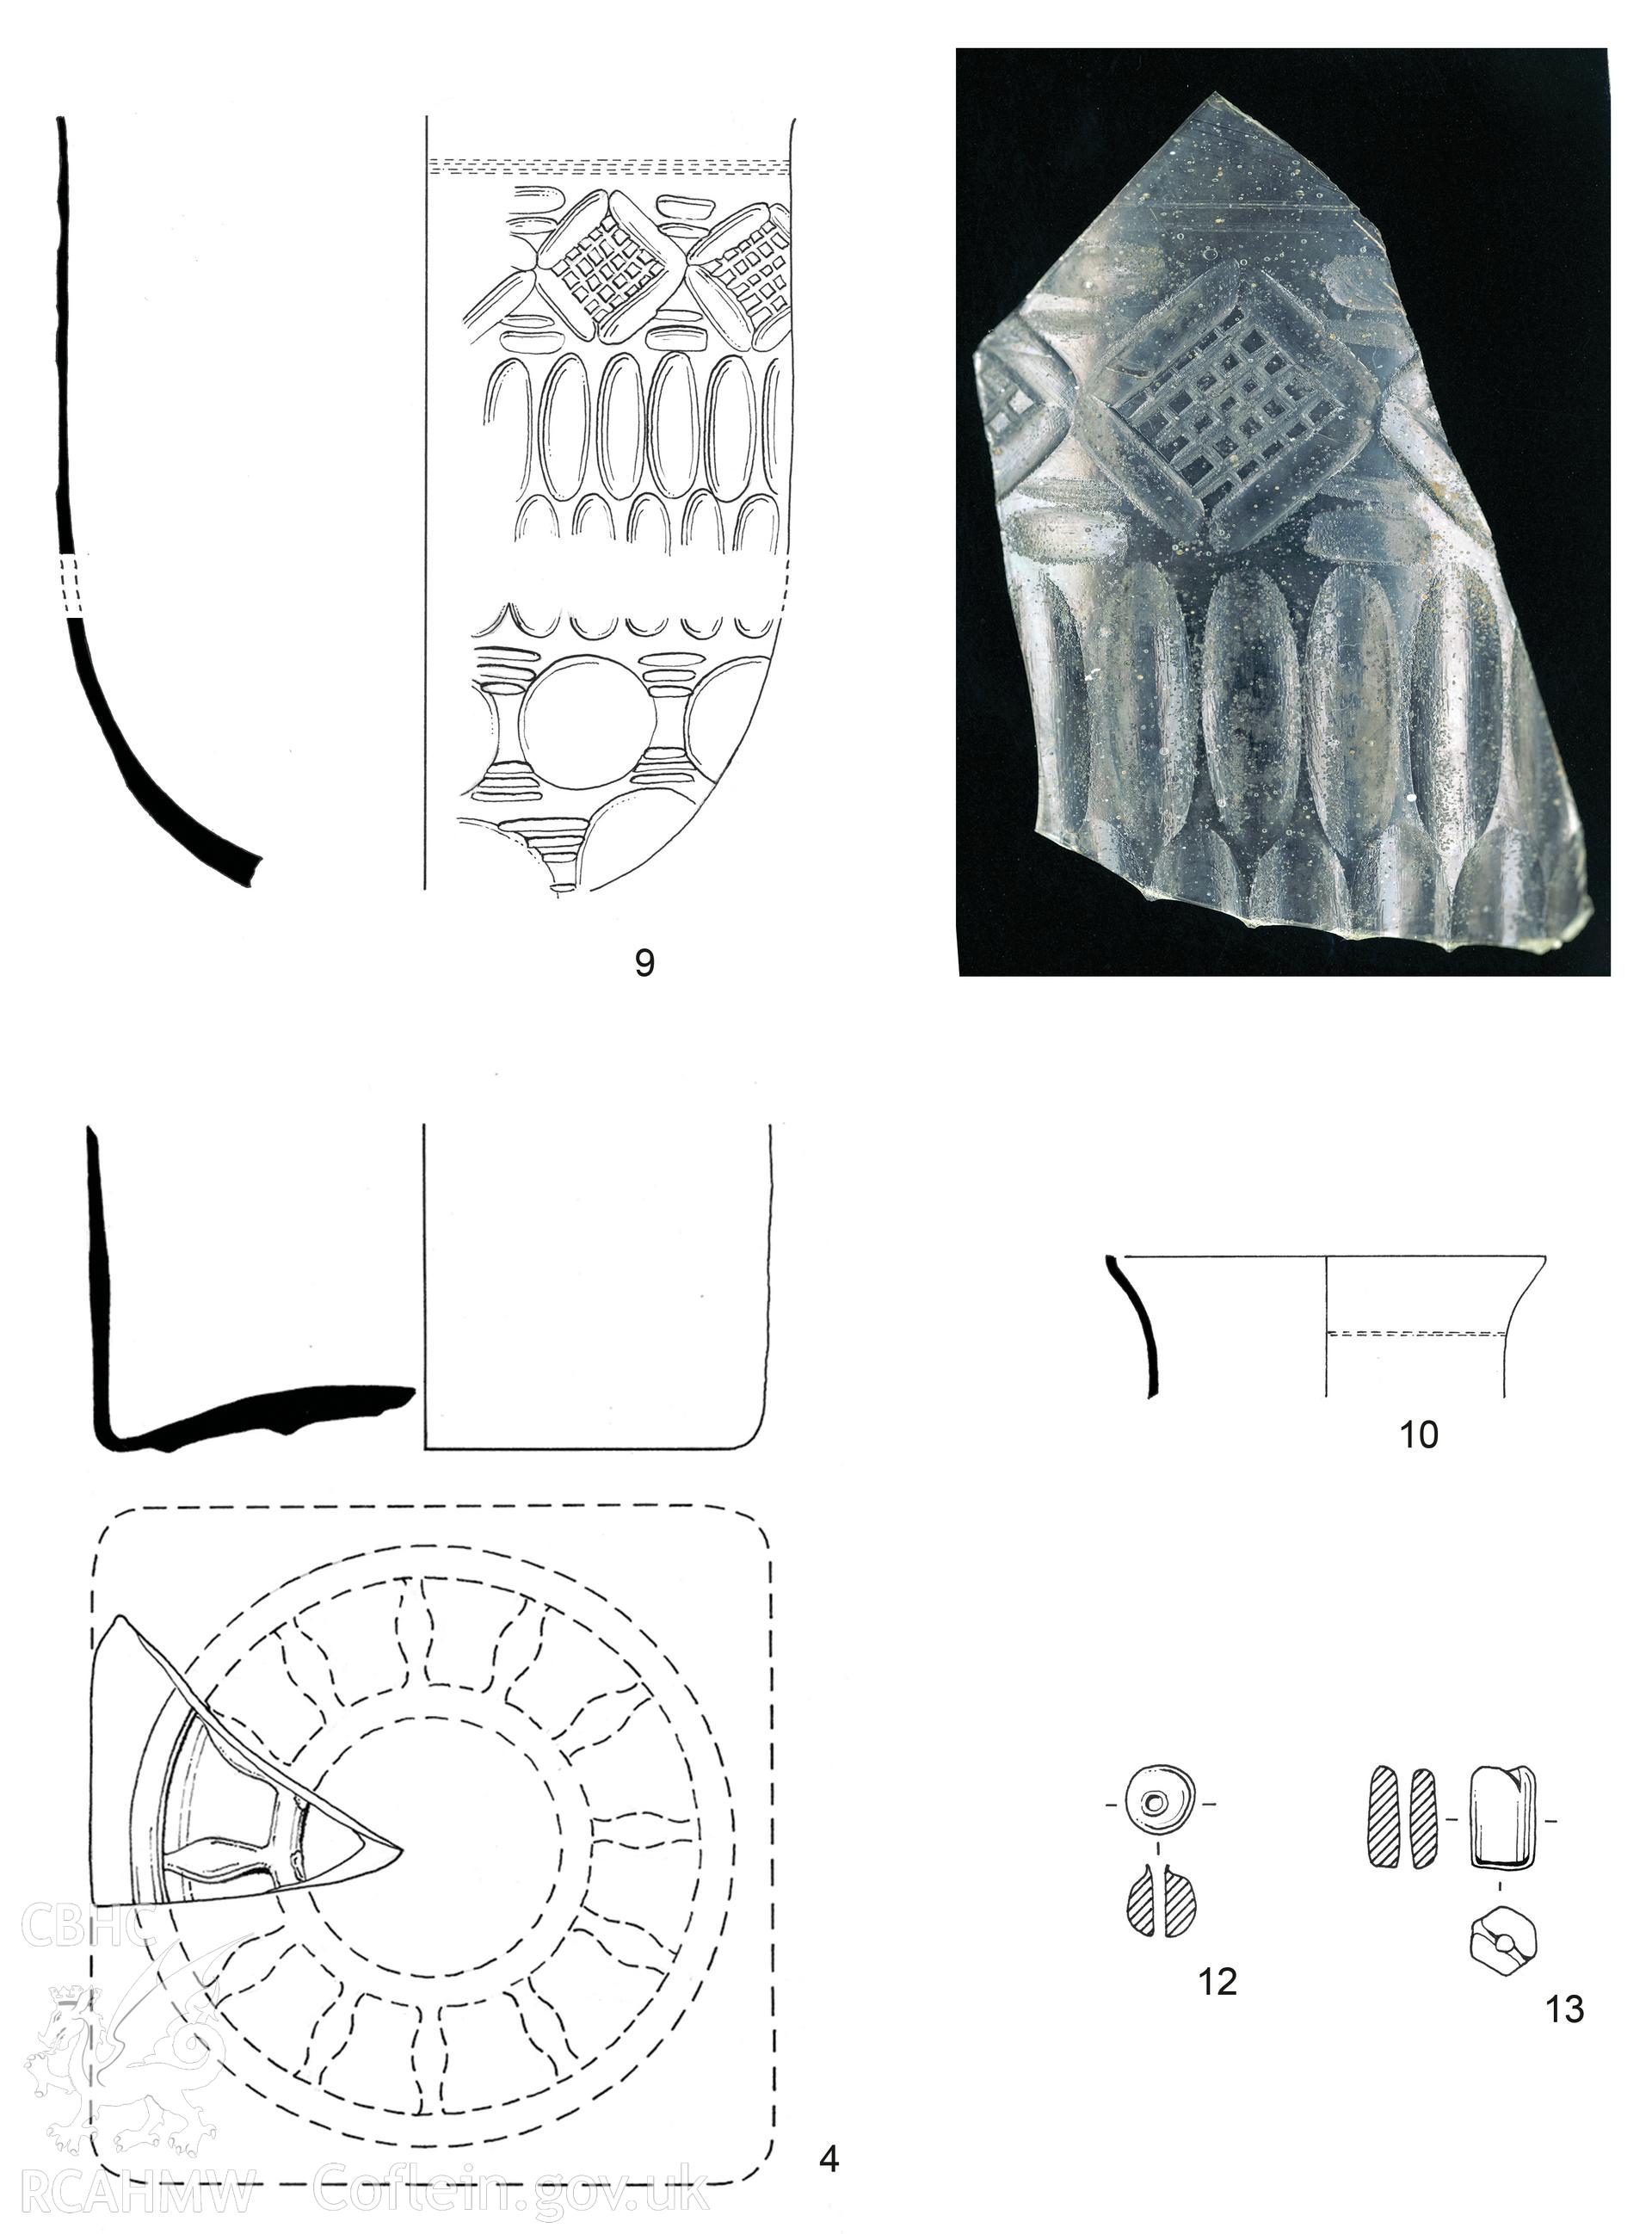 Arch Camb 167 (2018) 143-219. "The Romano-British villa at Abermagwr, Ceredigion: excavations 2010-2015" by Davies and Driver. Fig 19 Roman glass: vessels.